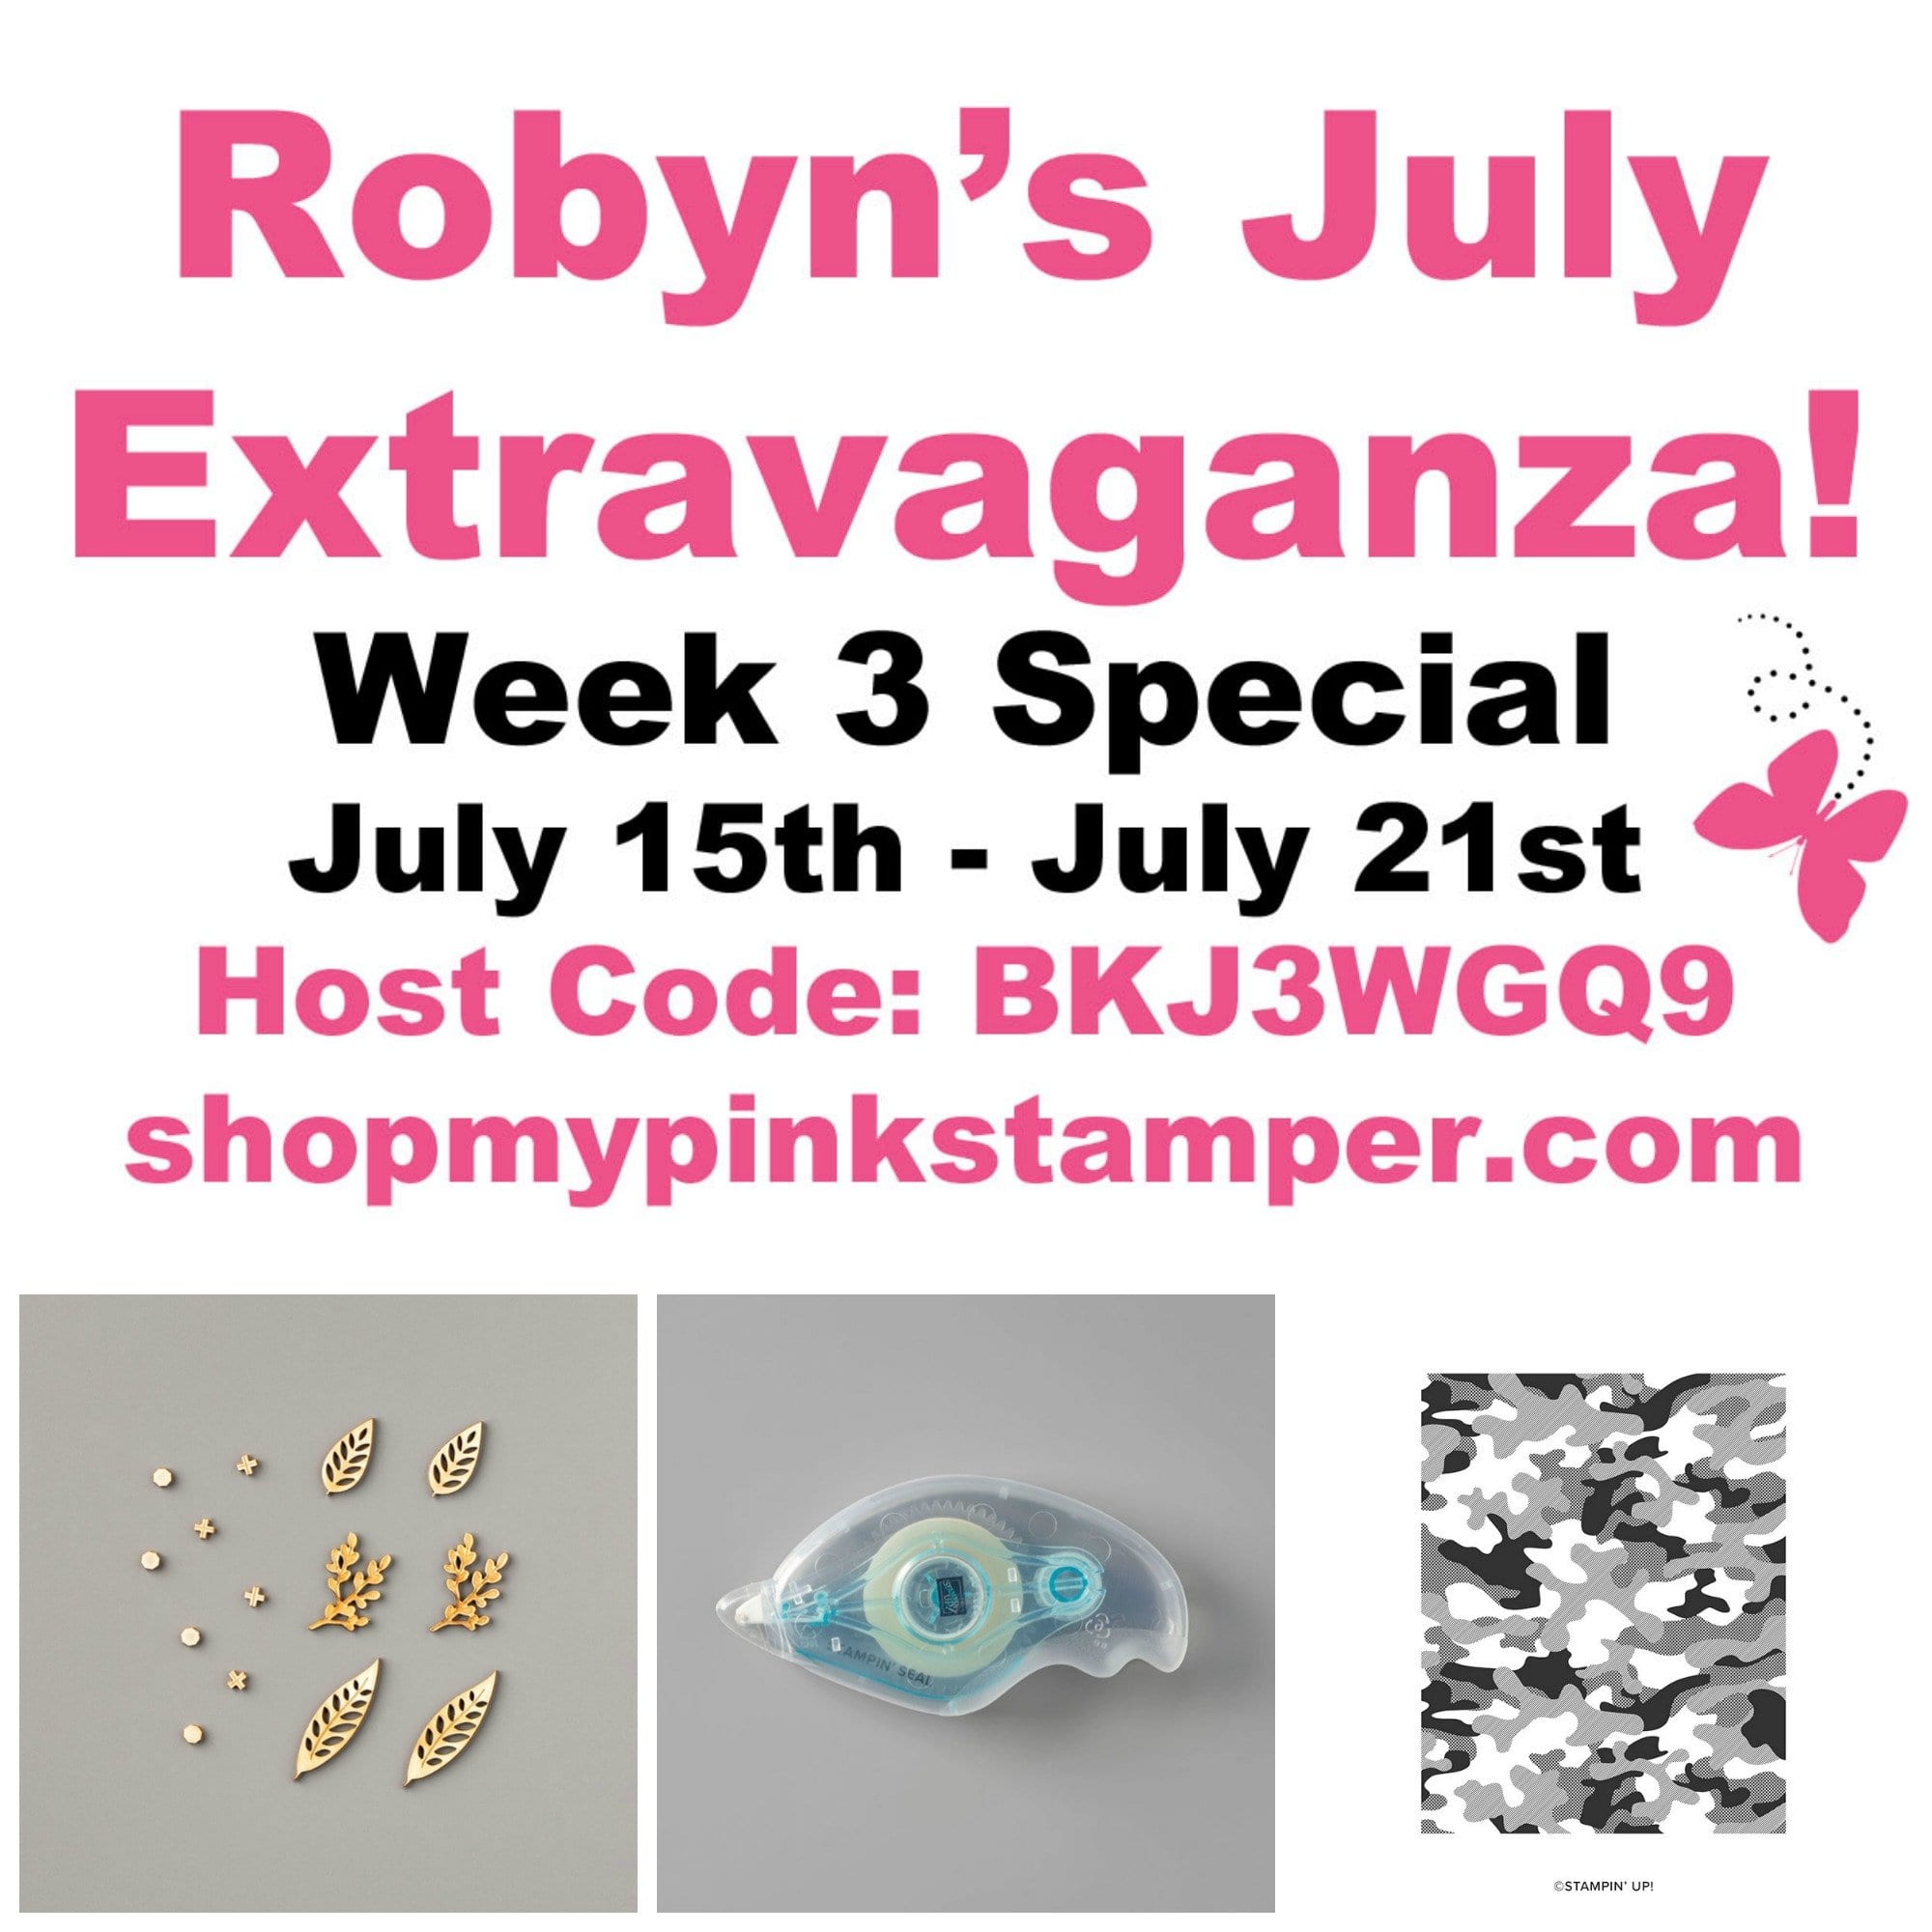 HUGE Week 3 Promotion & Day 15 of July Extravaganza!